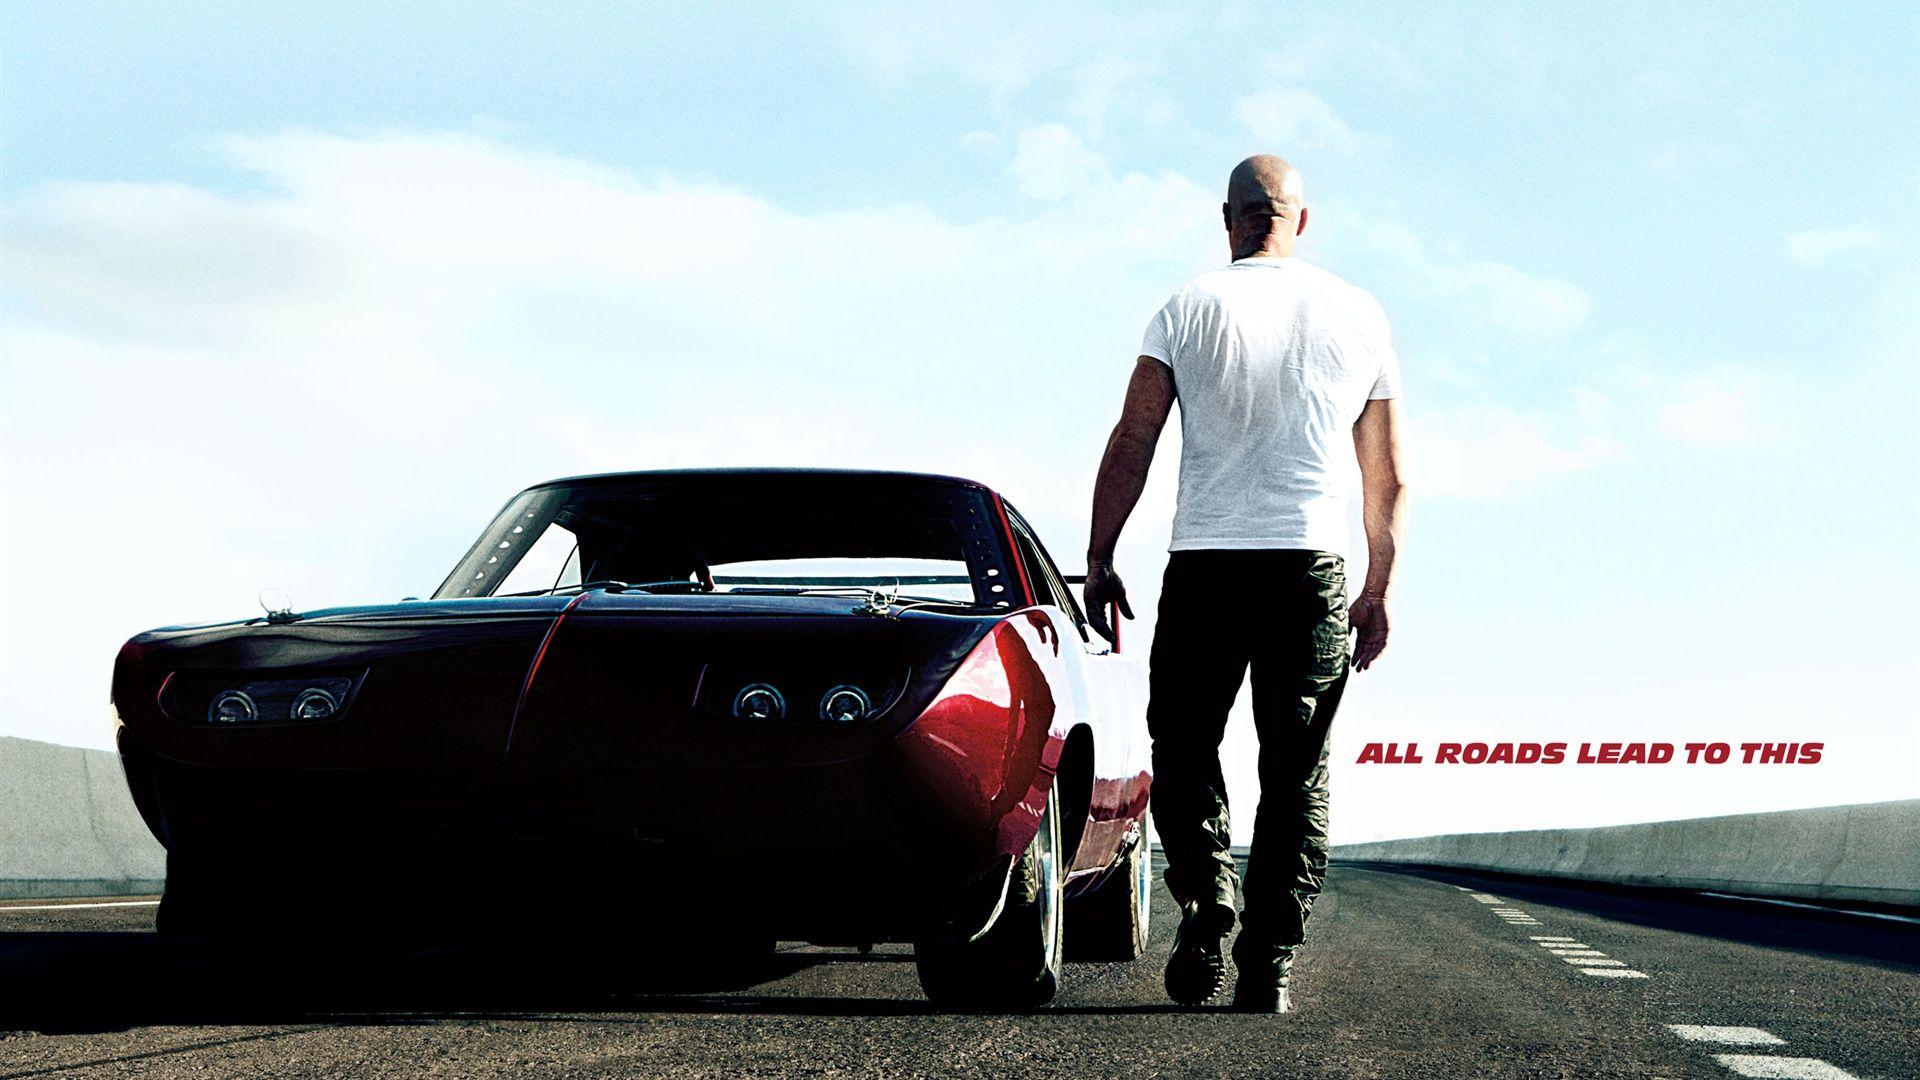 Fast And Furious 7 Wallpaper 36. Fast and furious, Tv cars, Furious movie